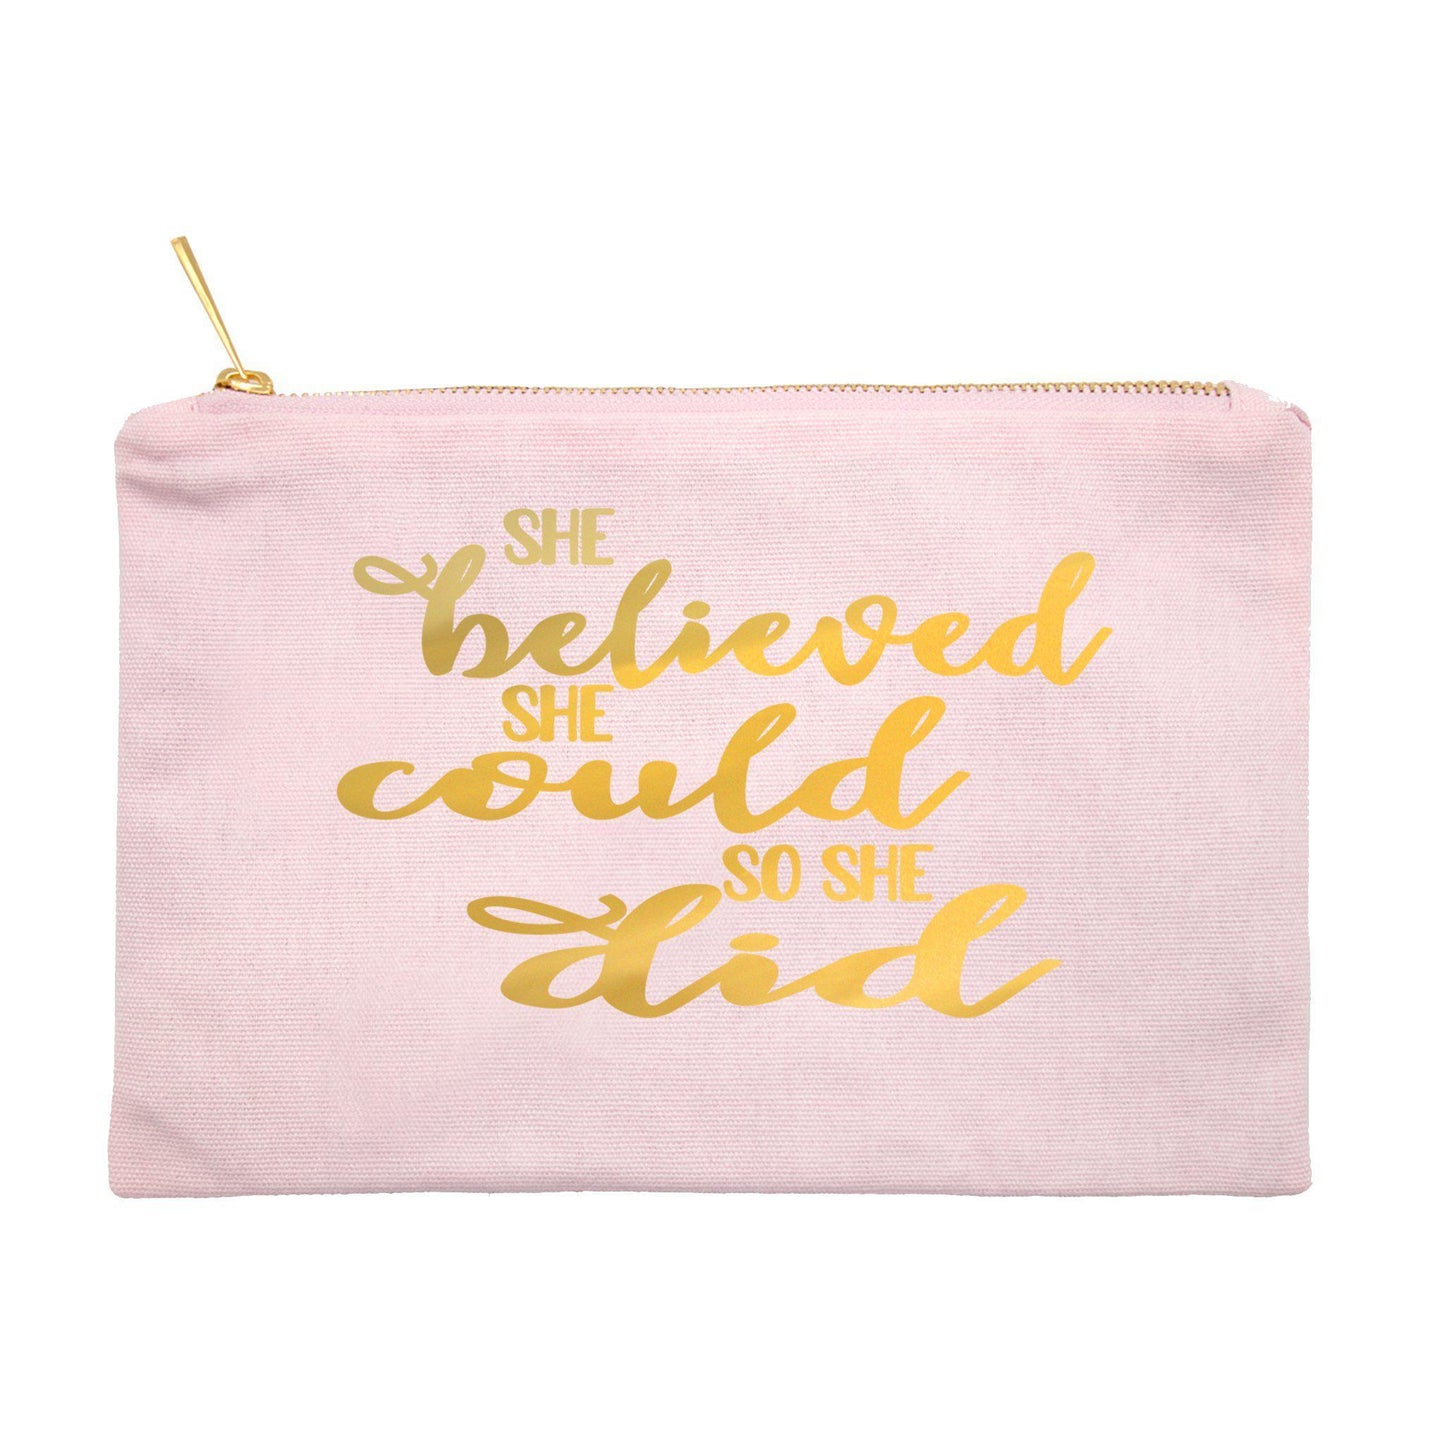 She Believed She Could So She Did Gold or Silver Foil Canvas Pouch in Black, Pink, or White-Luxe Palette